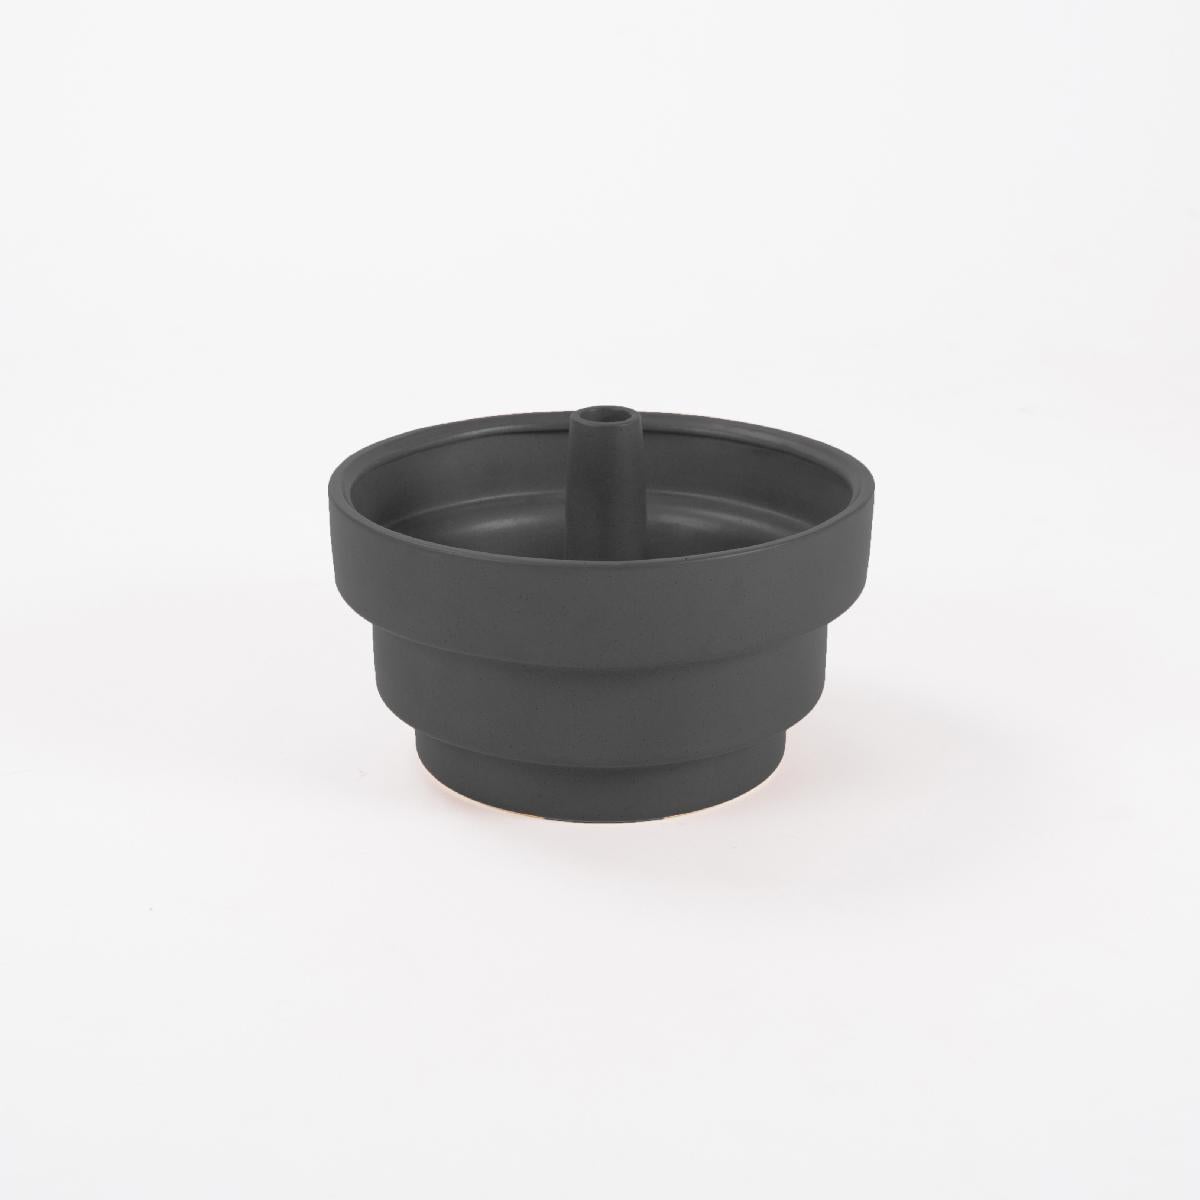 Pot made of ceramic in high temperature with ceramic tray on the base, color black or terracotta.